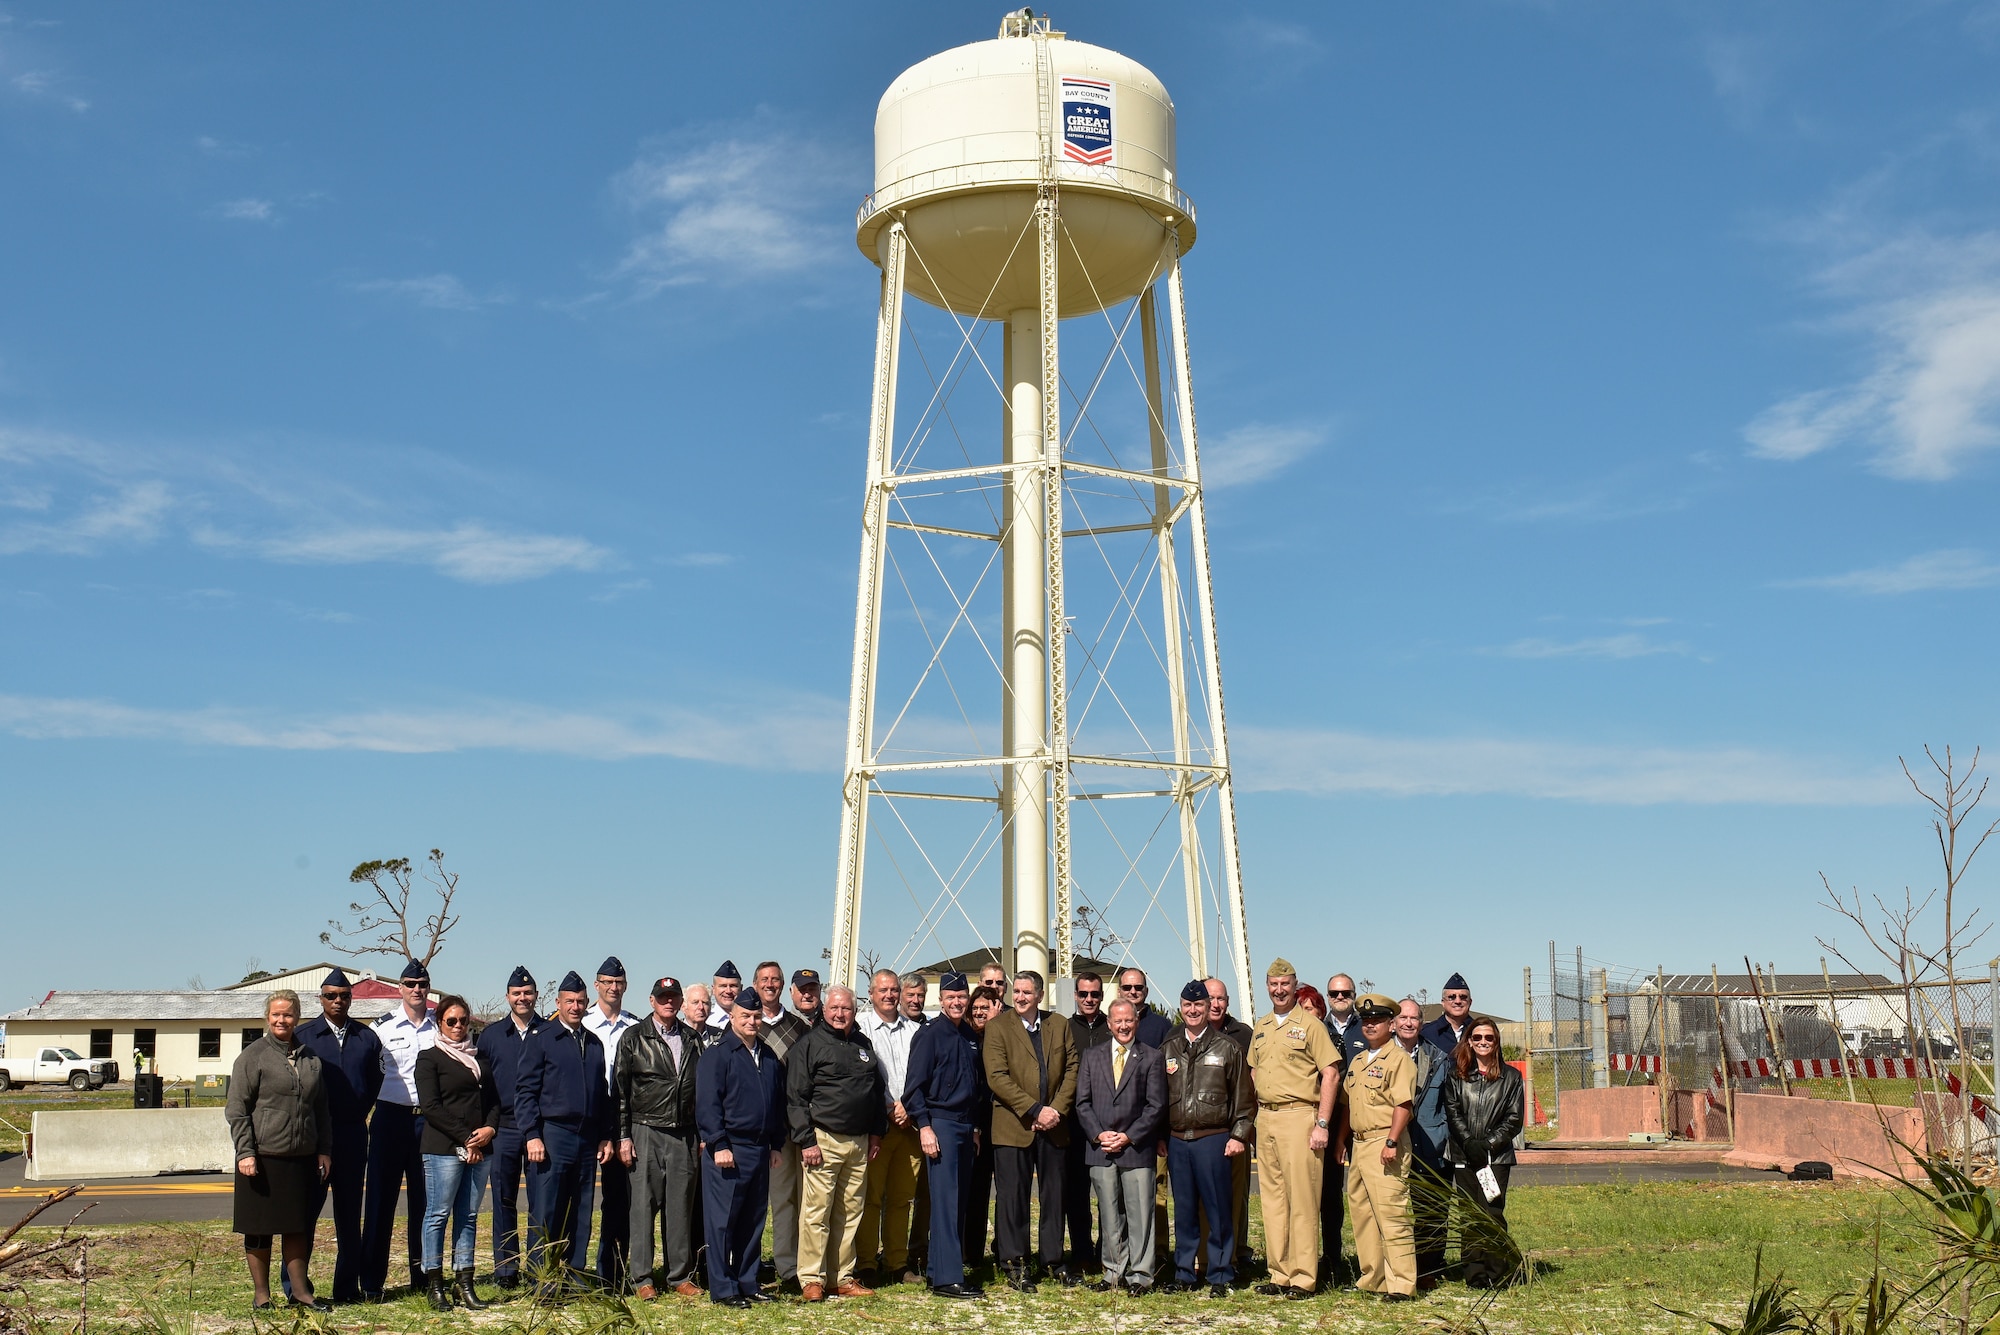 Members of the Great American Defense Community and Tyndall Air Force Base pose for a group photo during the unveiling of a logo on the installation’s water tower at Tyndall Air Force Base, Fla., Feb. 13, 2019. Tyndall was awarded the Great American Defense Community Award for 2019 with a commemorative logo painted on the water tower to represent Bay County’s accomplishments. Bay County is one of five communities across the country to be named a Great American Defense Community in 2019.  (U.S. Air Force photo by Staff Sgt. Alexandre Montes)